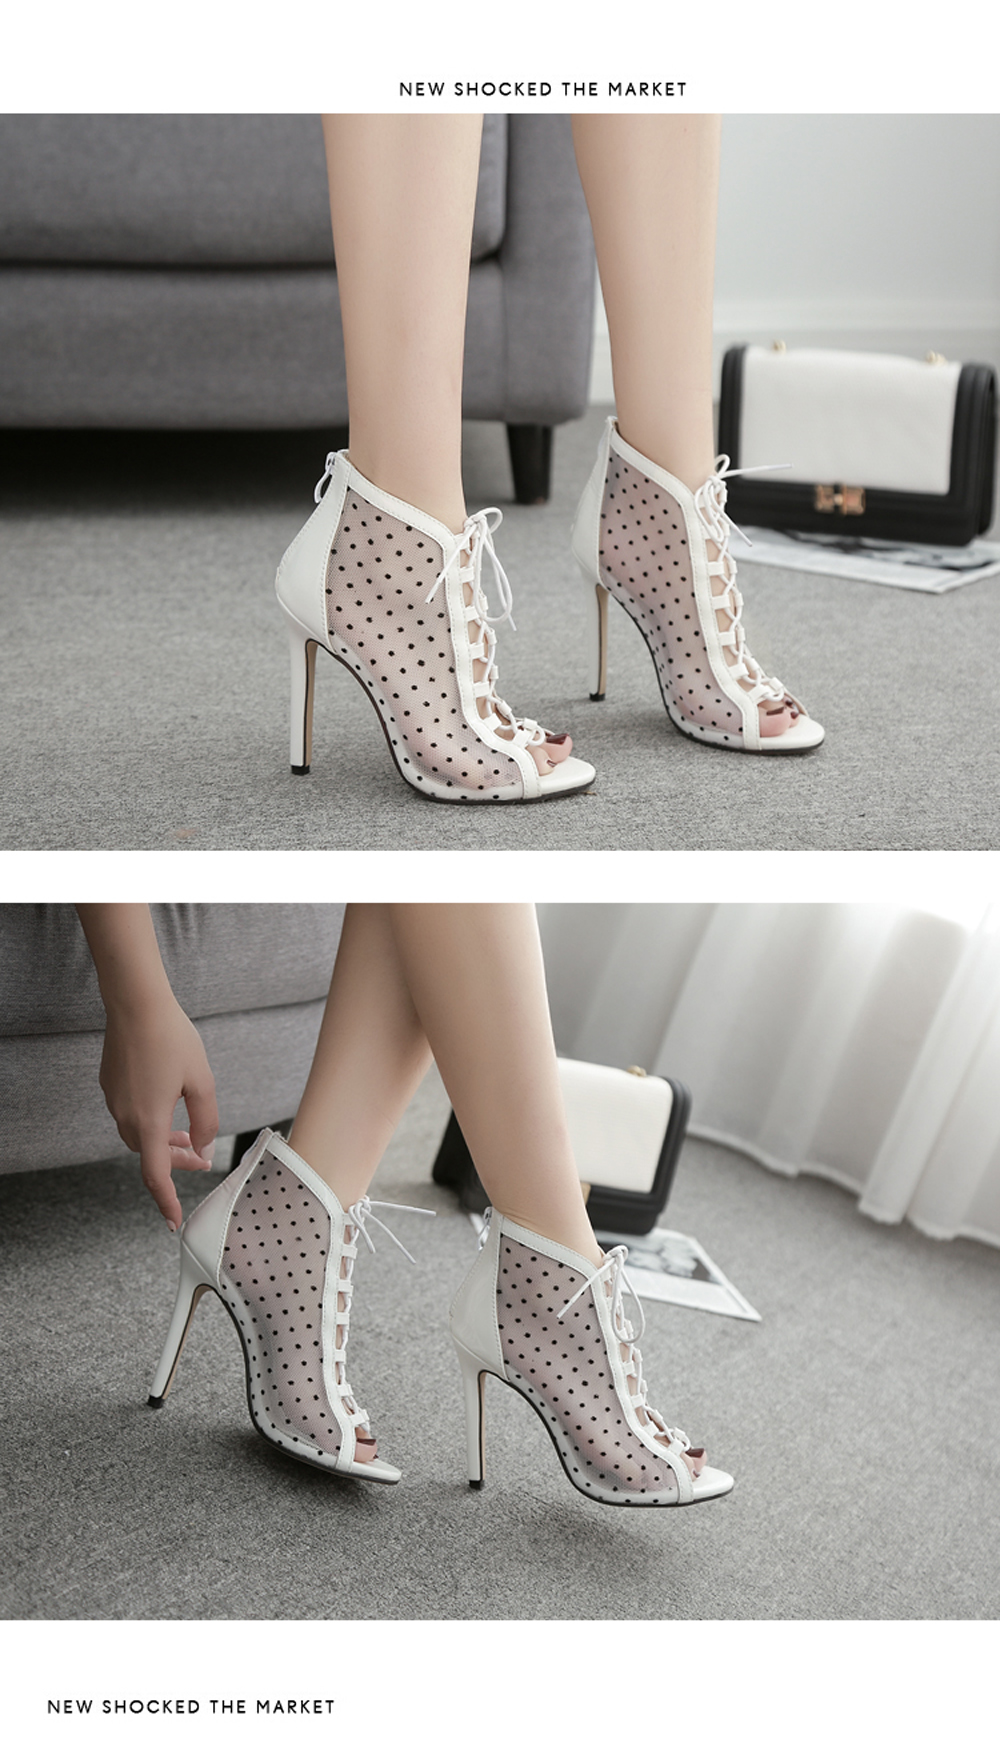 Women's Peep Toe Stiletto High Heels Sweet Sandals with Checkered